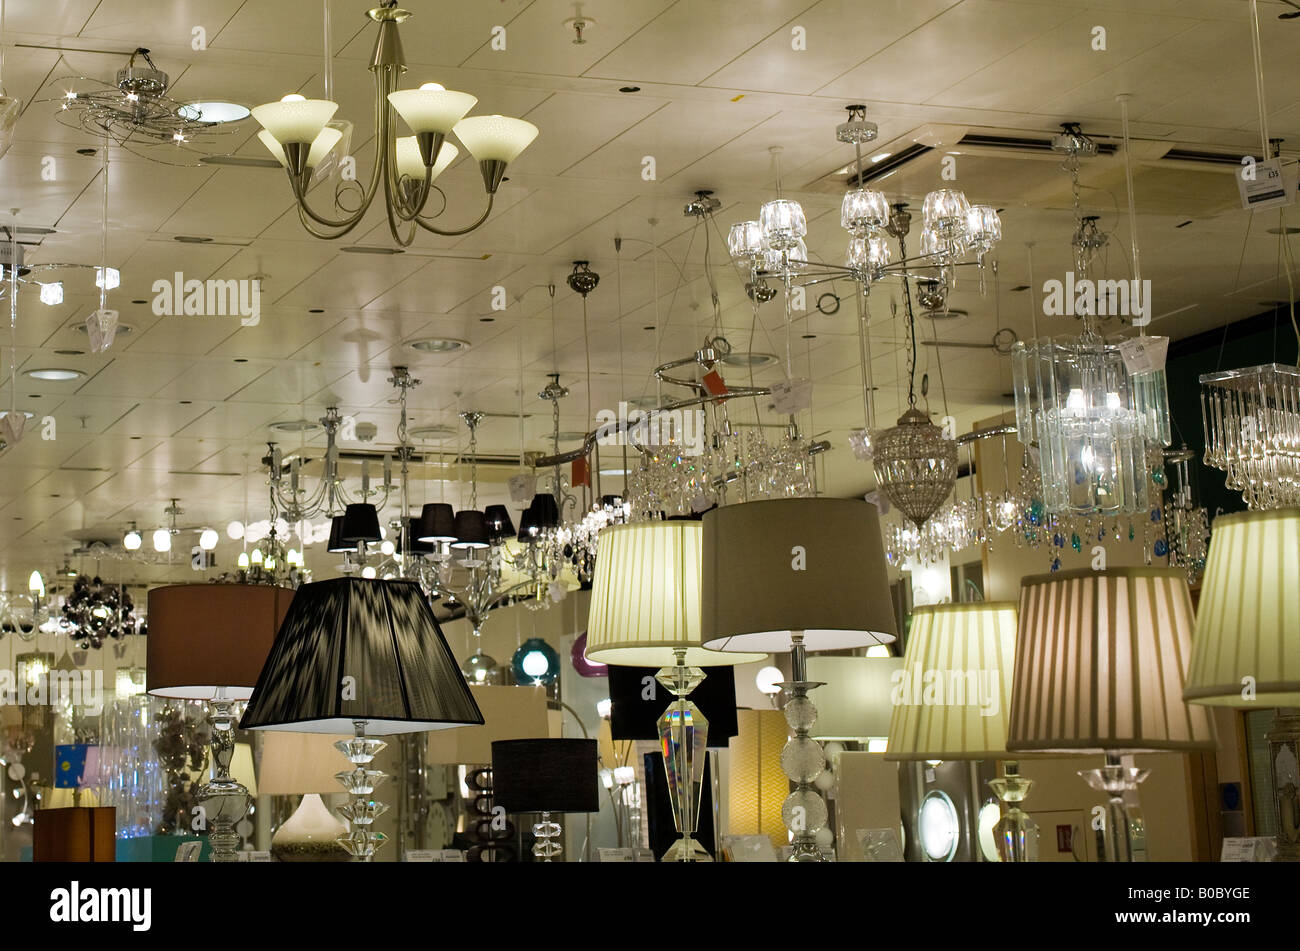 Domestic lights in lighting department store Stock Photo